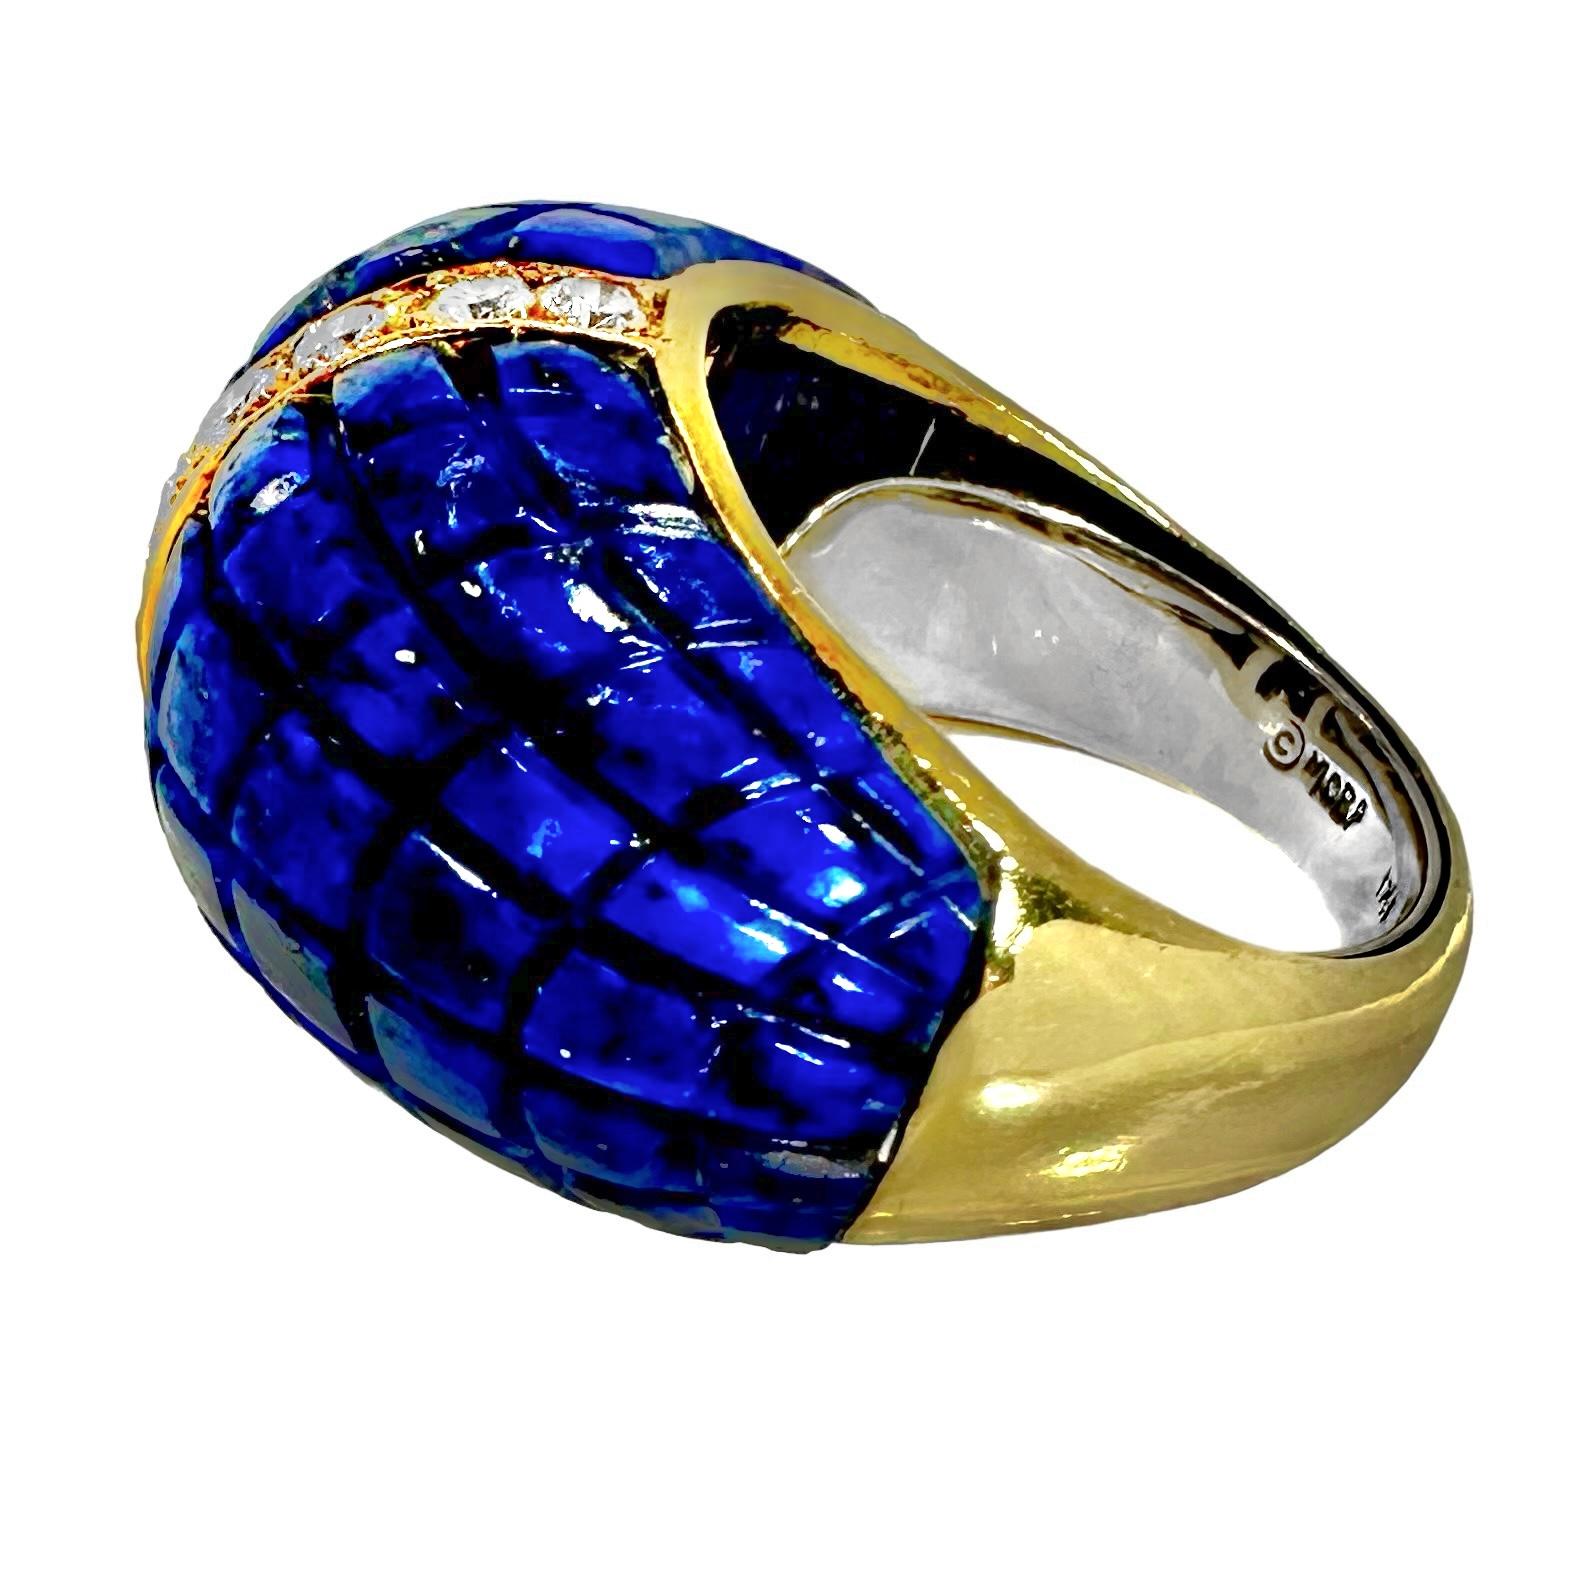 Exquisitely Crafted Italian 18K Yellow Gold, Lapis Lazuli, and Diamond Ring In Good Condition For Sale In Palm Beach, FL